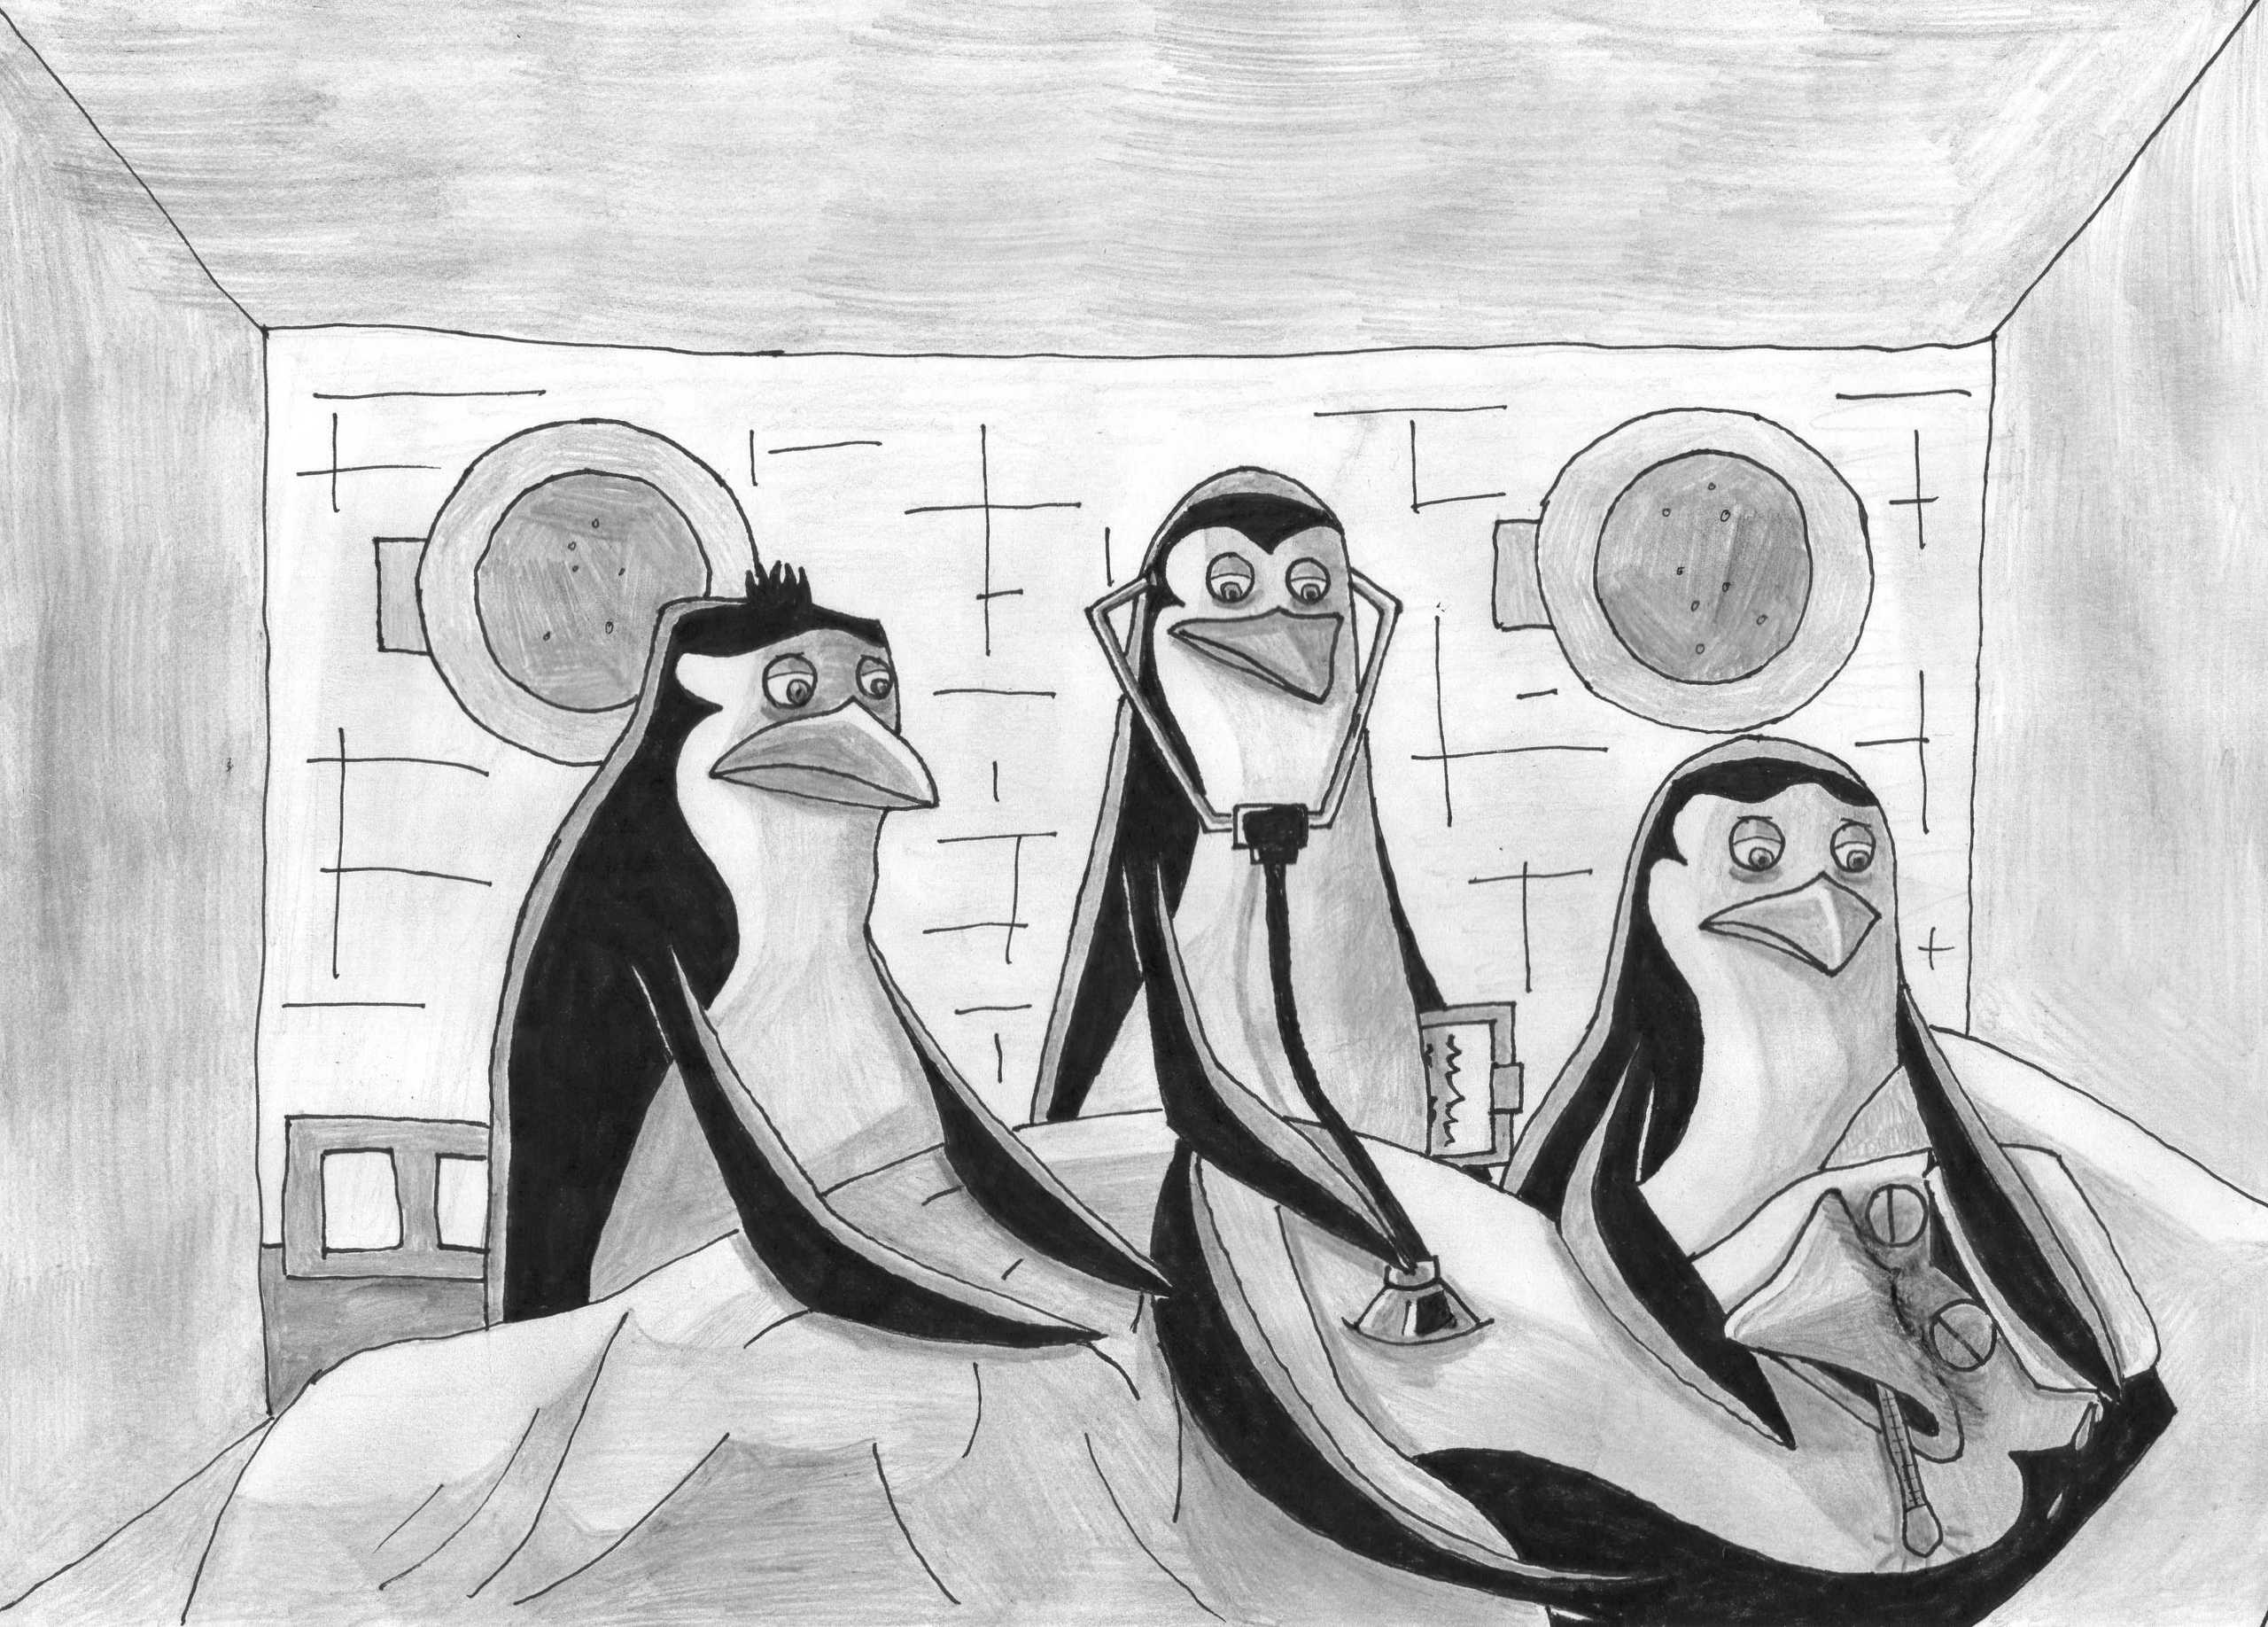 pinguin, penguin of madagascar fan Art: The team is always oleh your side.